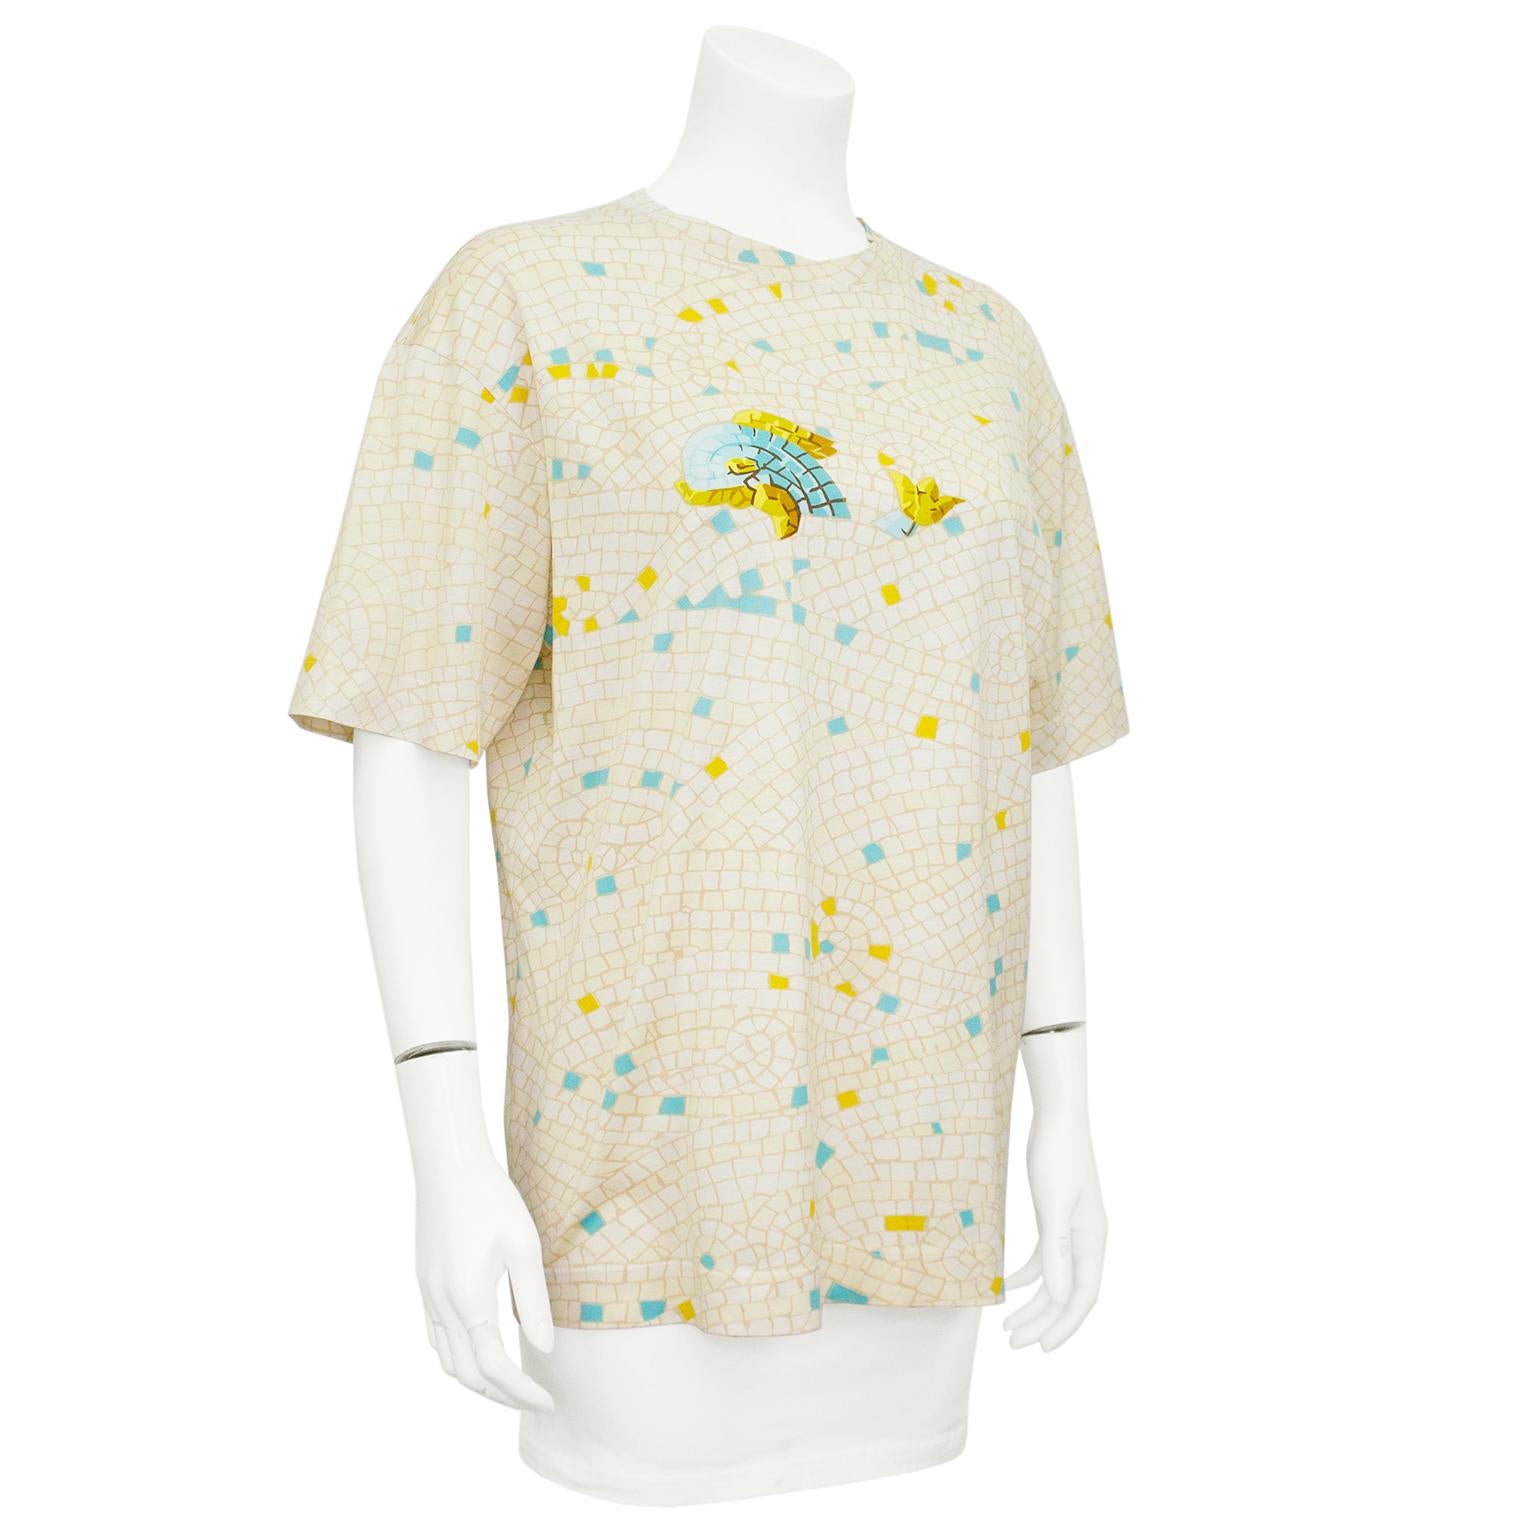 Silk cotton blend Hermes t-shirt from the 1990s. Cream and beige all over mosaic tile print with accent yellow and turquoise tiles. Front features a turquoise and gold mosaic tile whale. Crew neckline and short sleeves. Tonal top stitching.